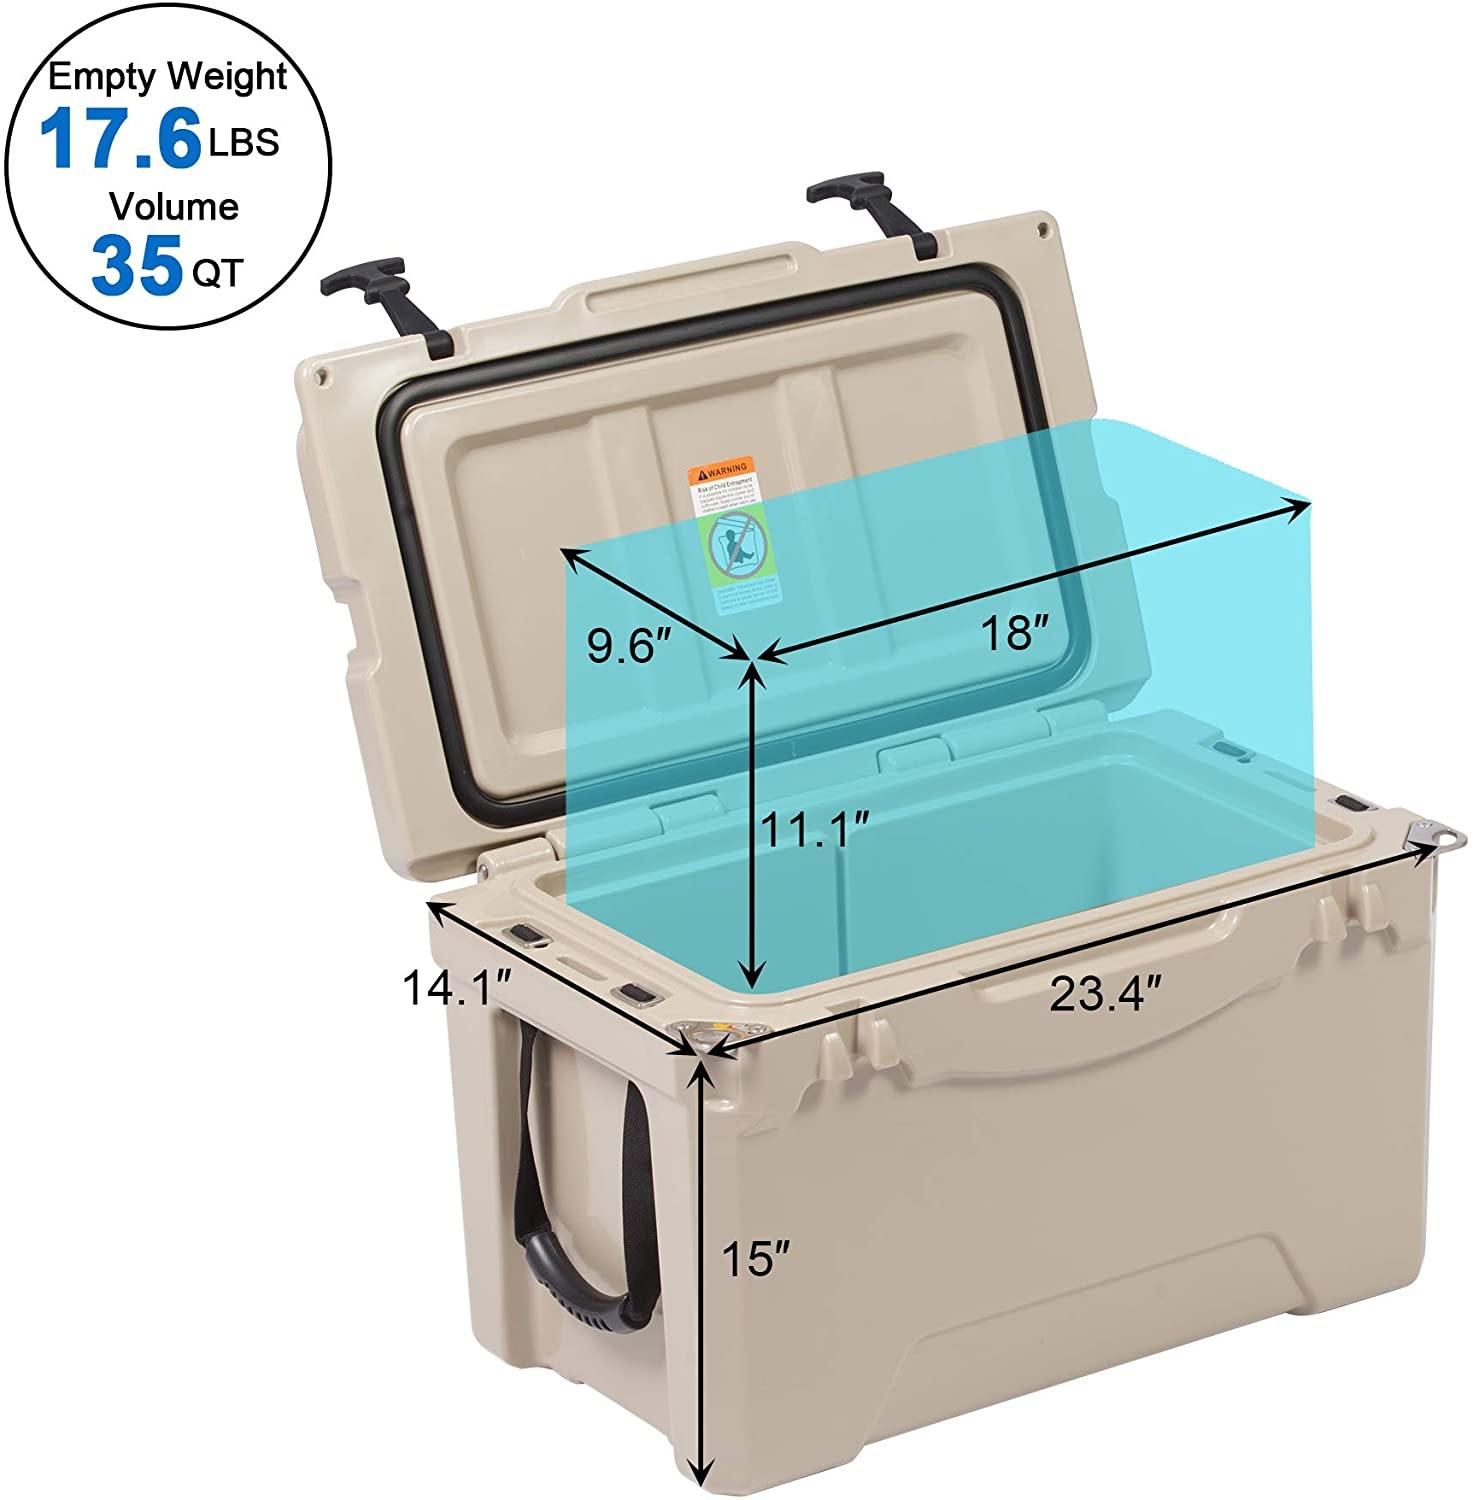 35QT Rotomolded Insulated Ice Cooler 3-5 Days Ice Chest with Built-in Fish Ruler, Bottle Opener, Cup Holder